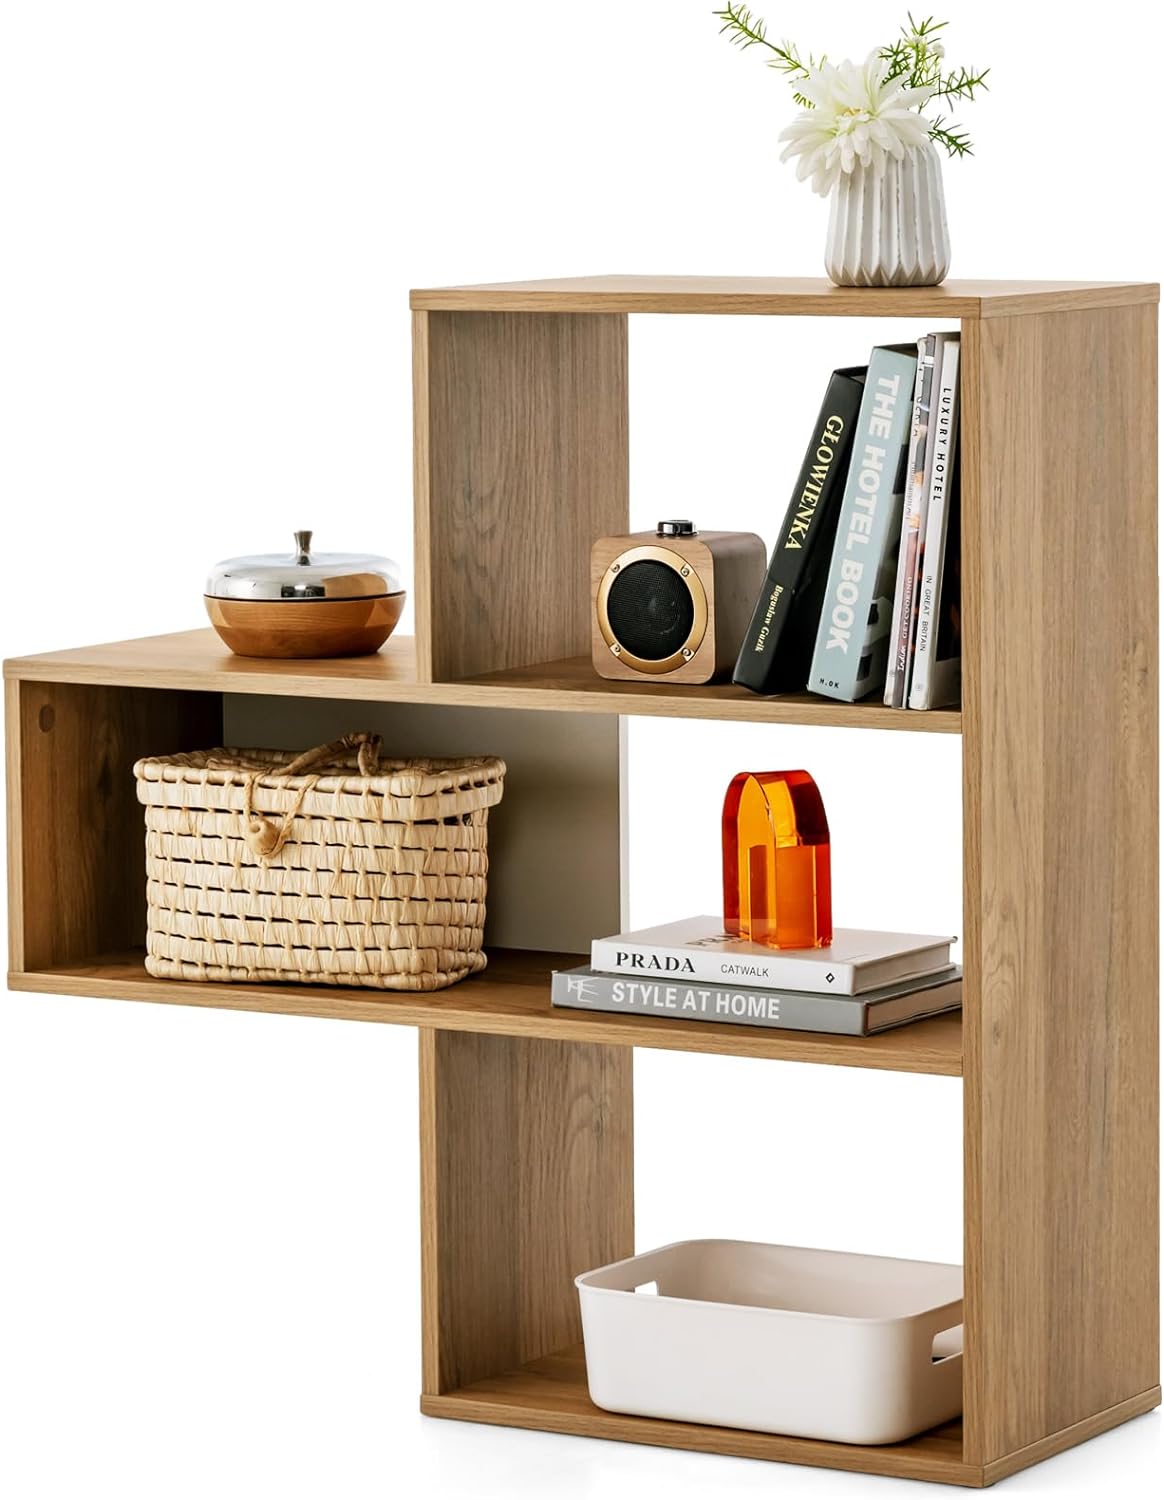 Giantex 3-Tier Bookshelf, Wooden Concave Bookcase for Small Space, Modern Freestanding Display Storage Shelves